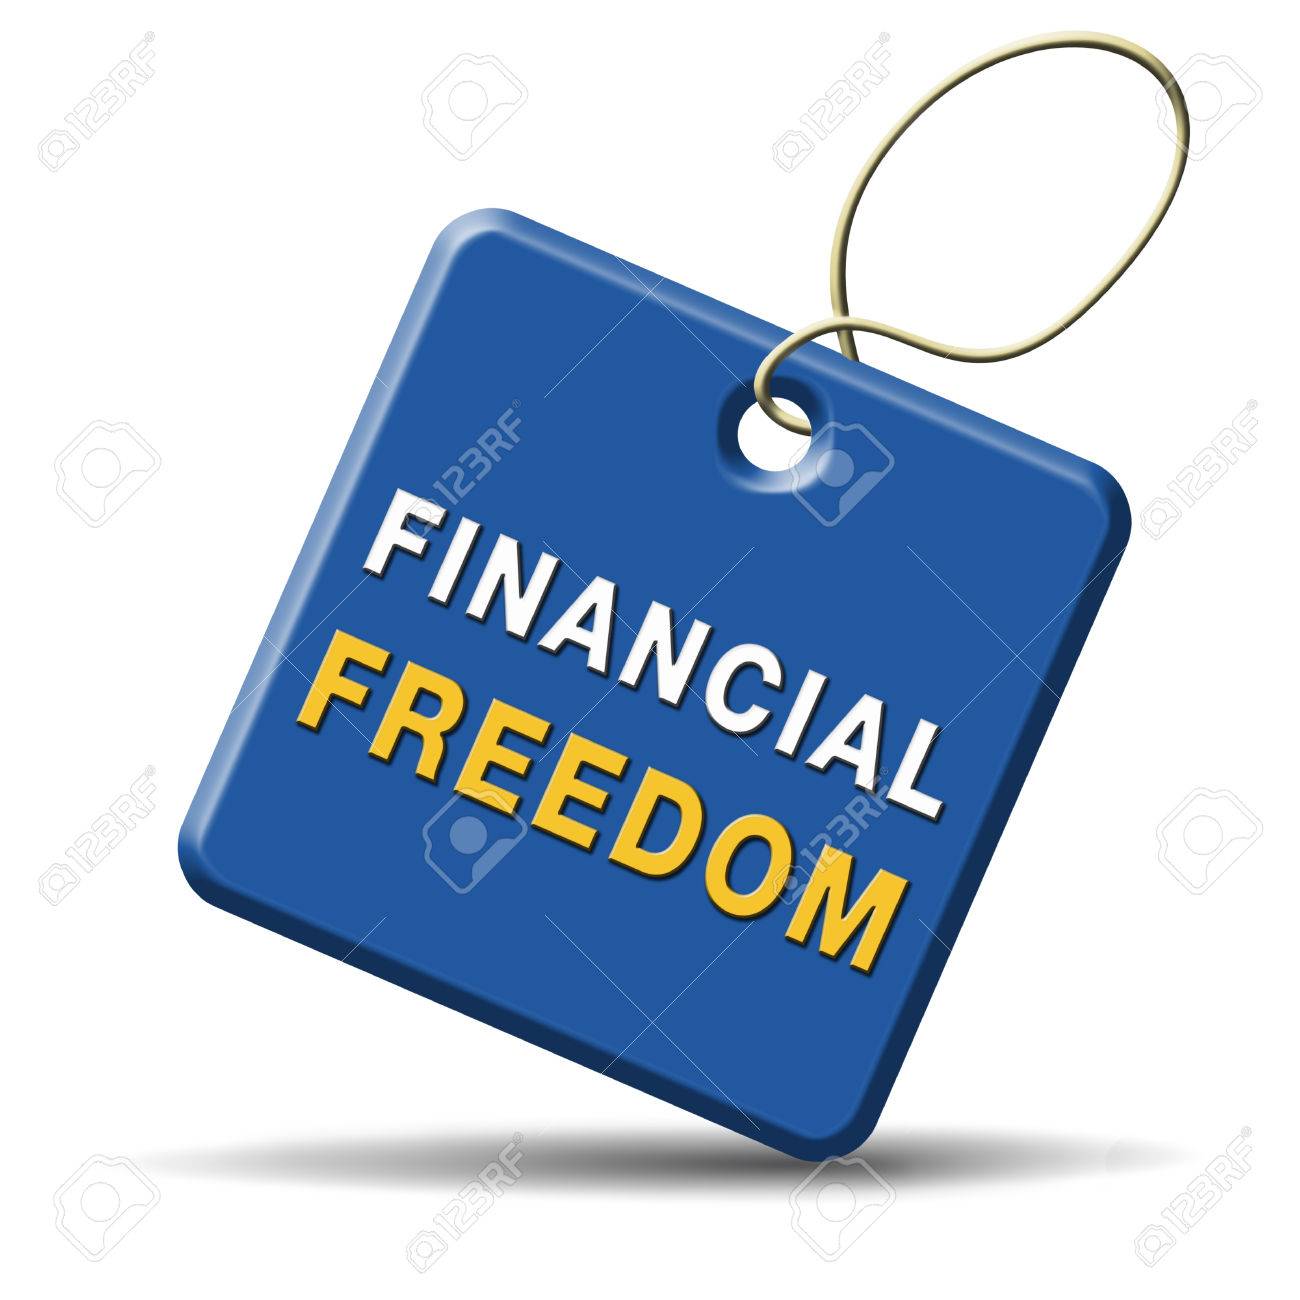 Debt Free Icon Stock image and royalty-free vector files on 